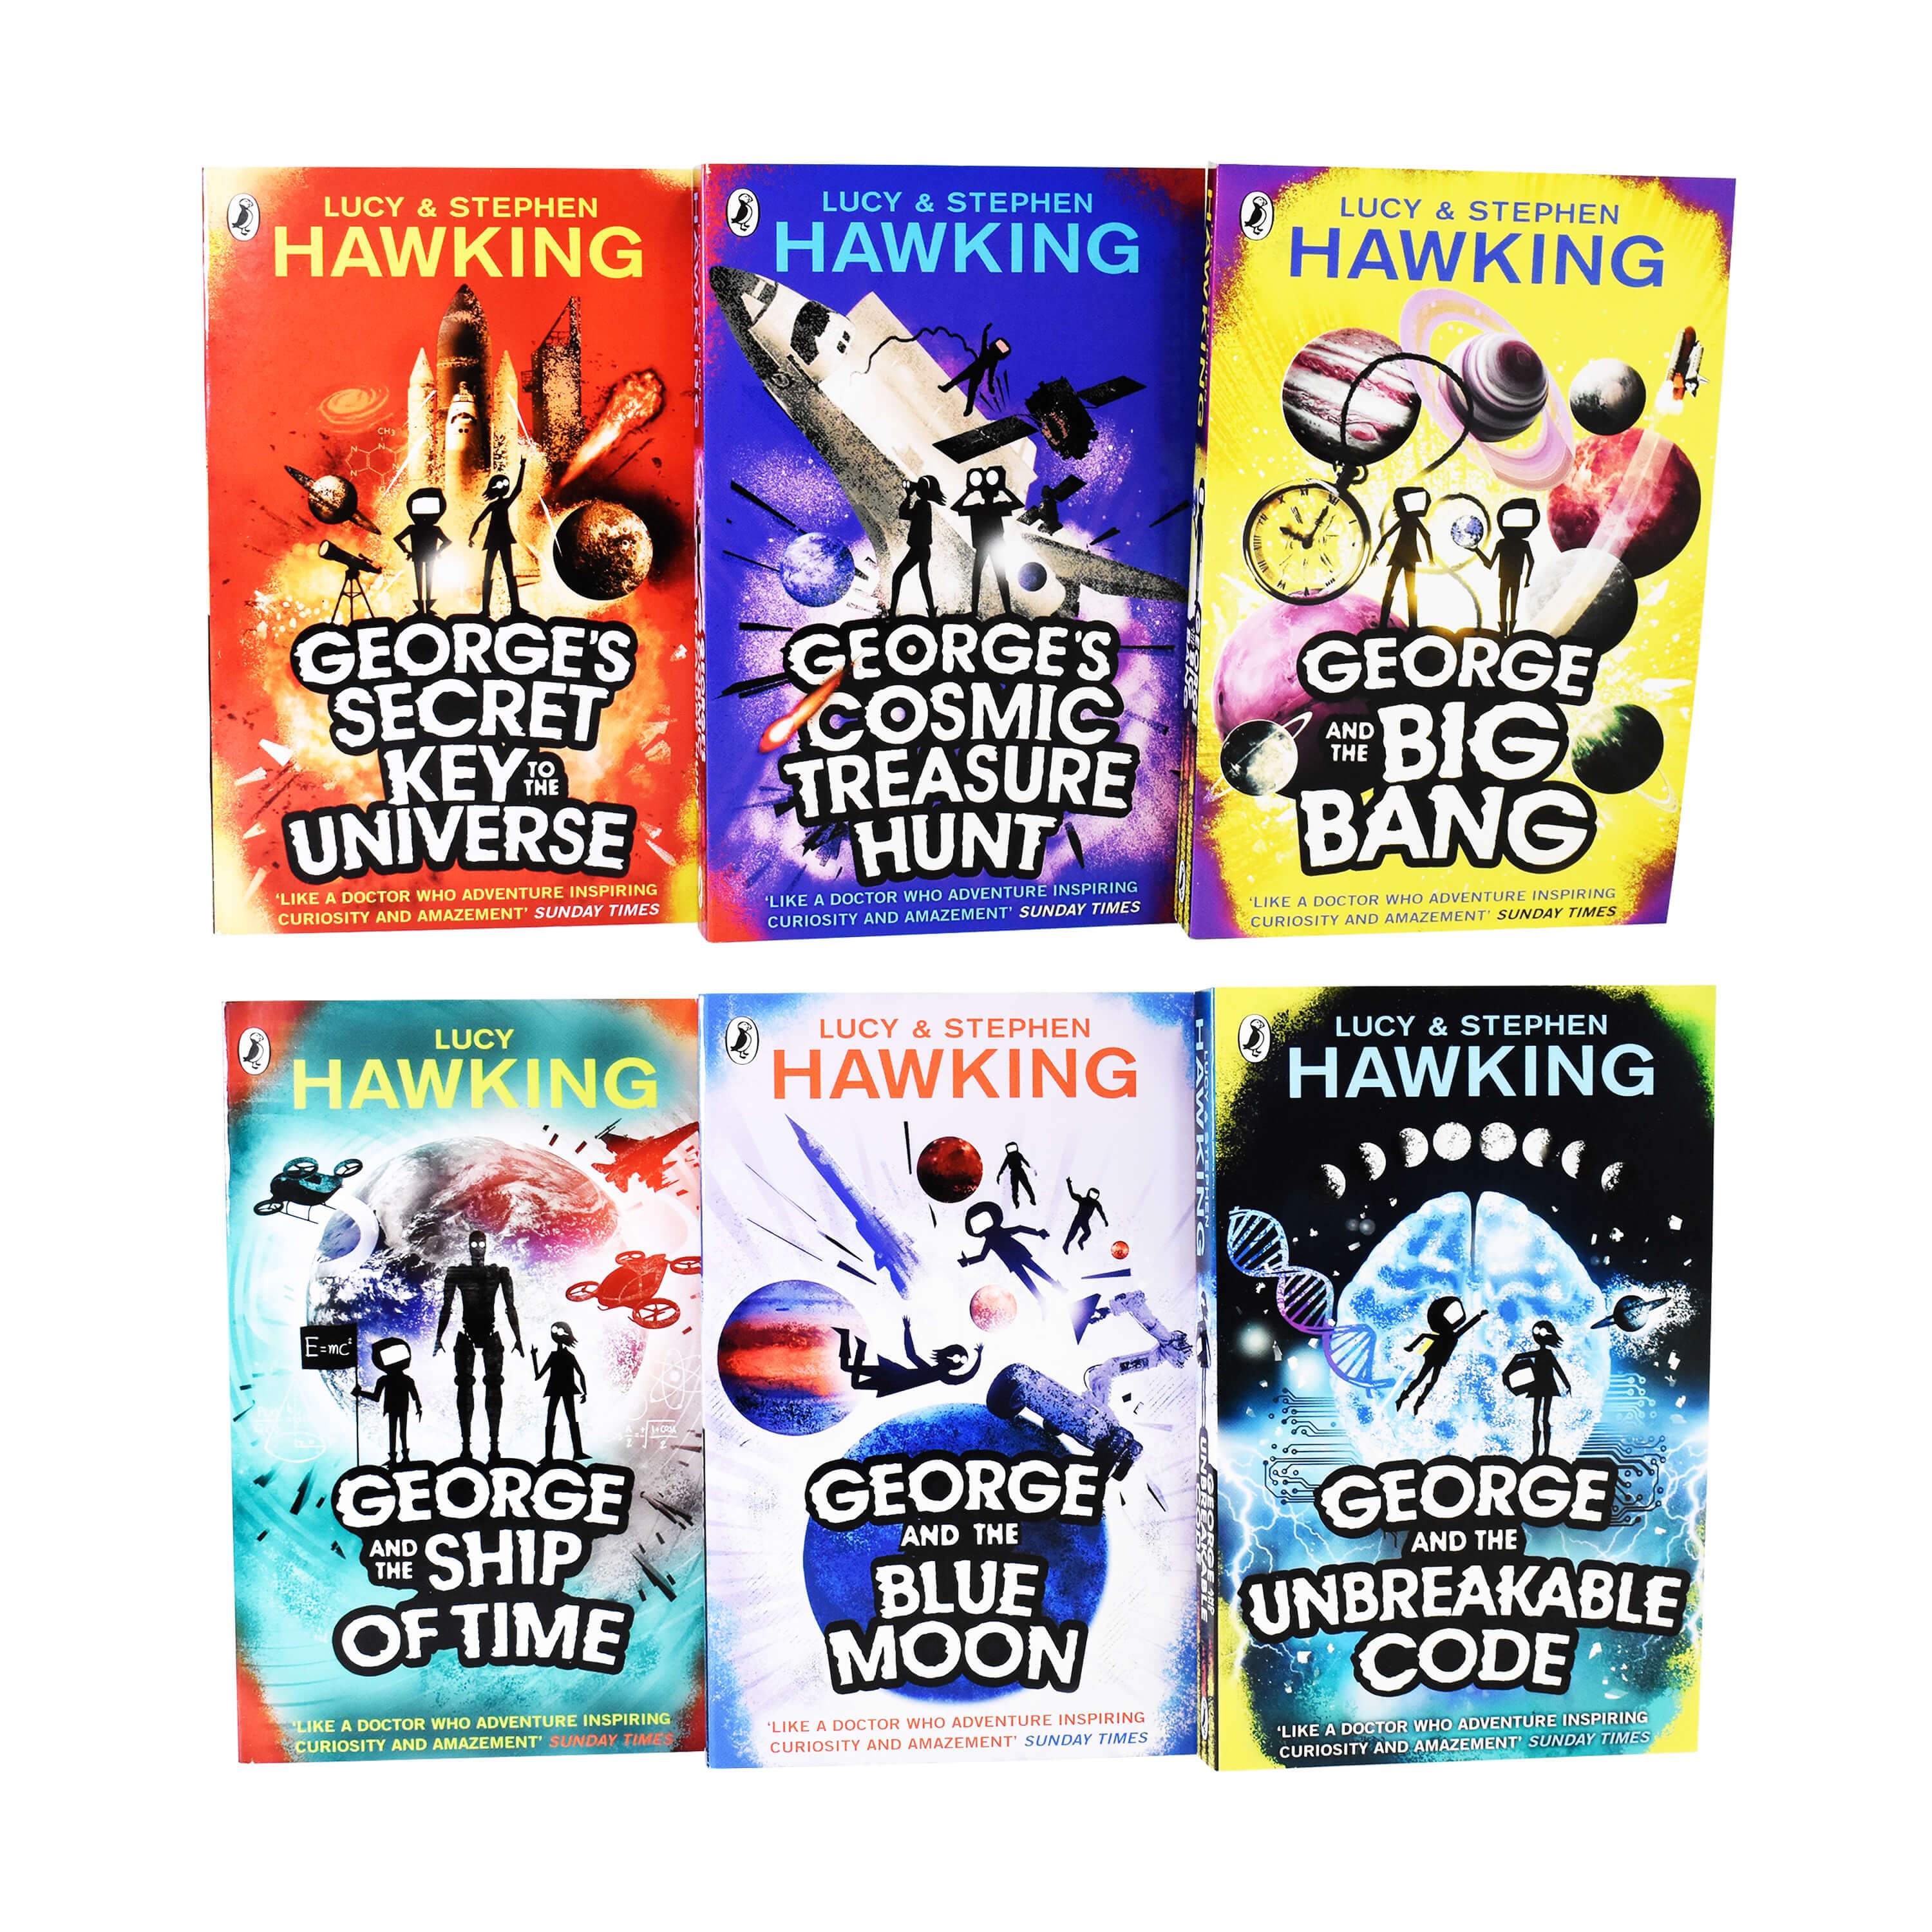 Georges Secret Key To The Universe 6 Books Children Collection Paperback Set By Lucy & Stephen Hawking - St Stephens Books